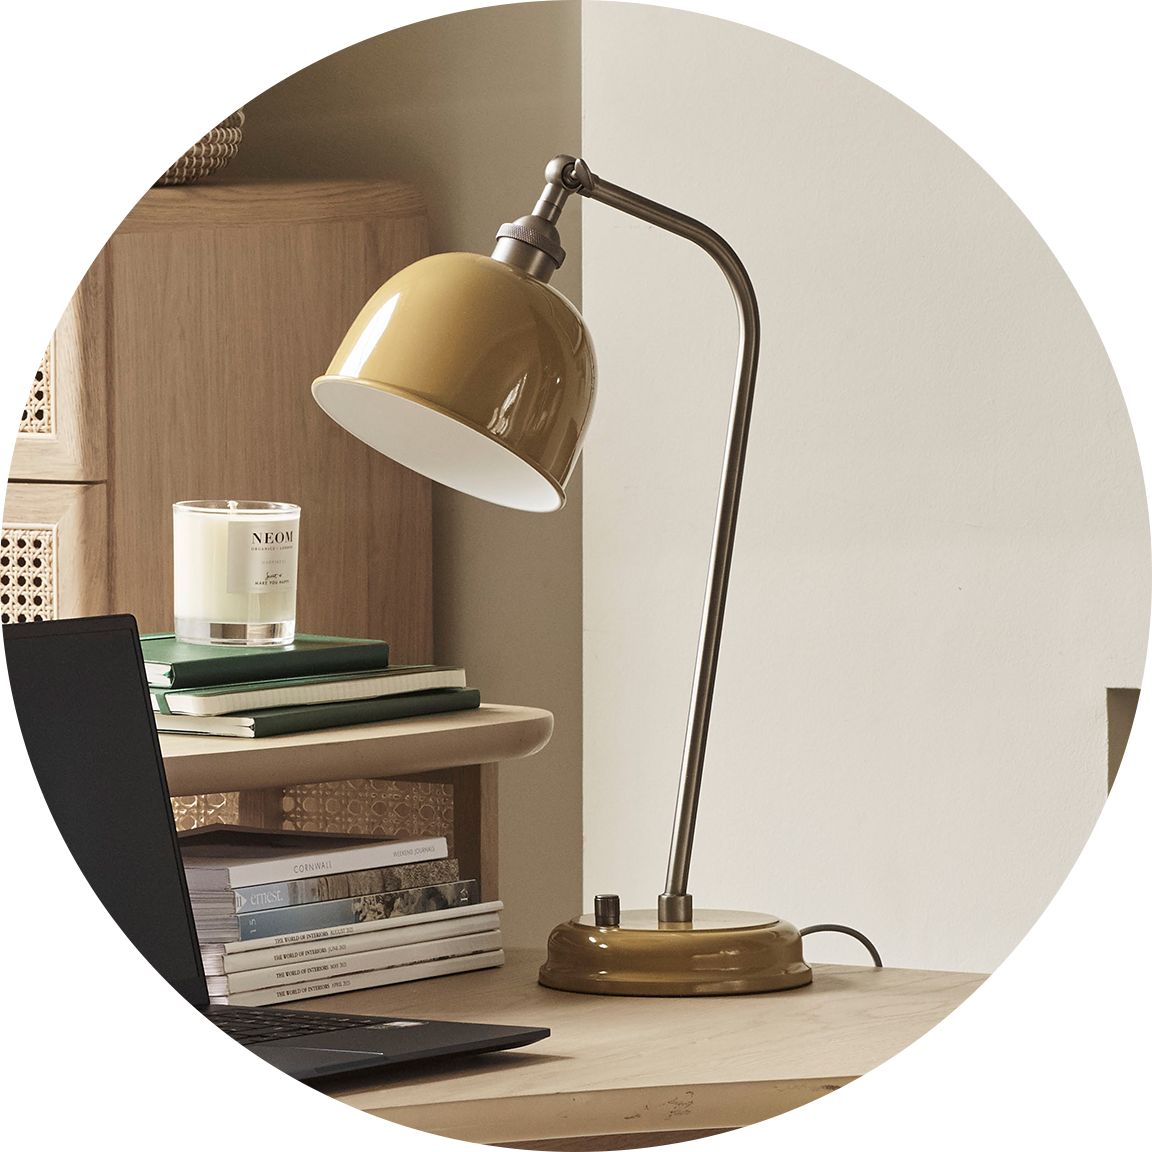 Desk table and bedside lamps